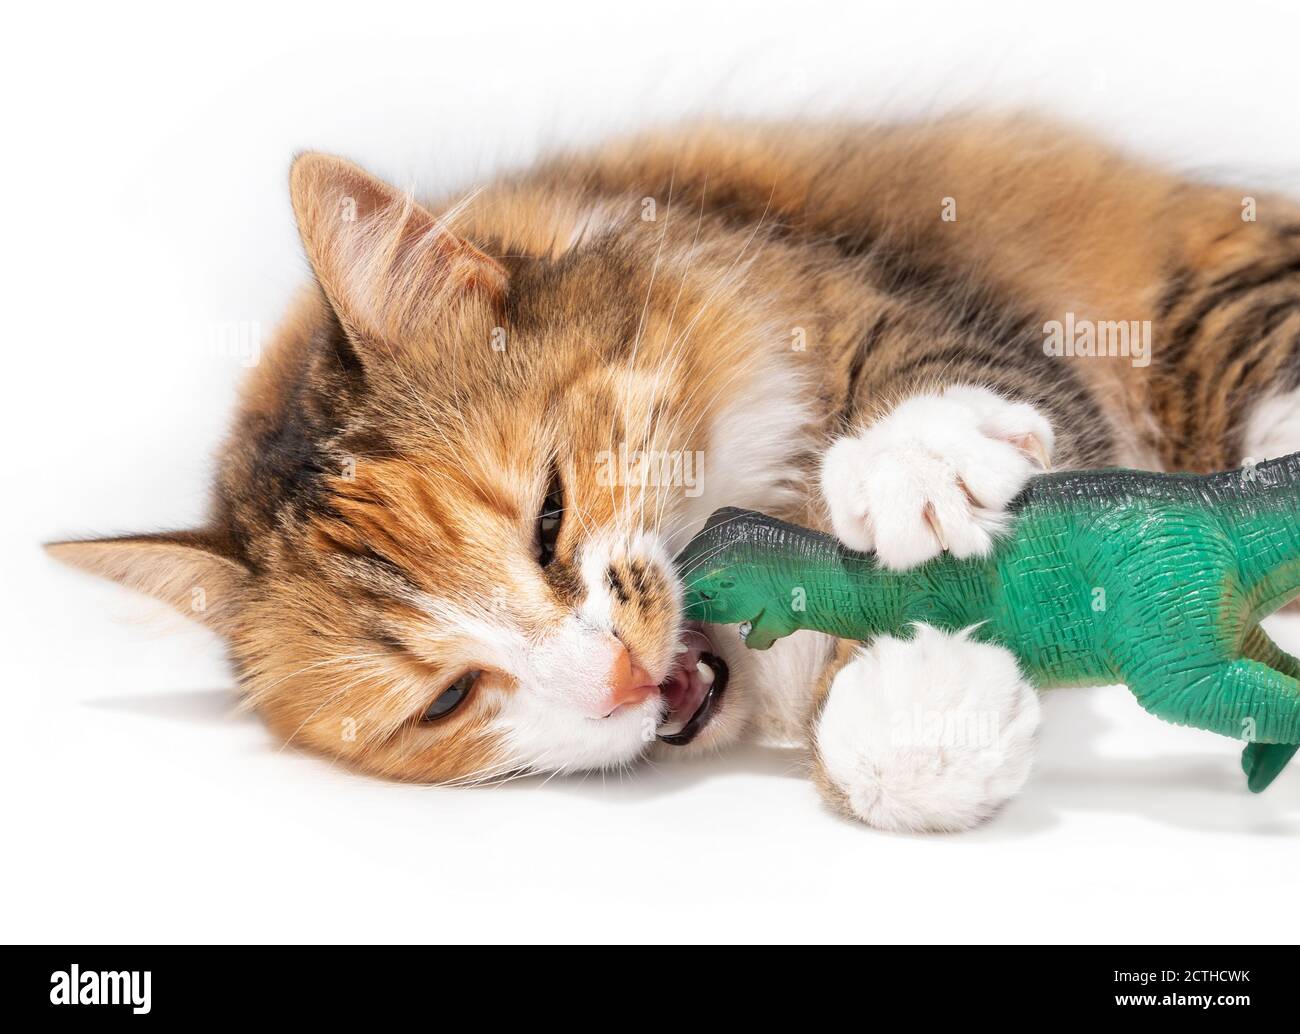 Cat vs dinosaur. A long hair fluffy kitty is laying sideways. The playful 1 year old cat has a large green plastic toy in the mouth and chewing it. Stock Photo